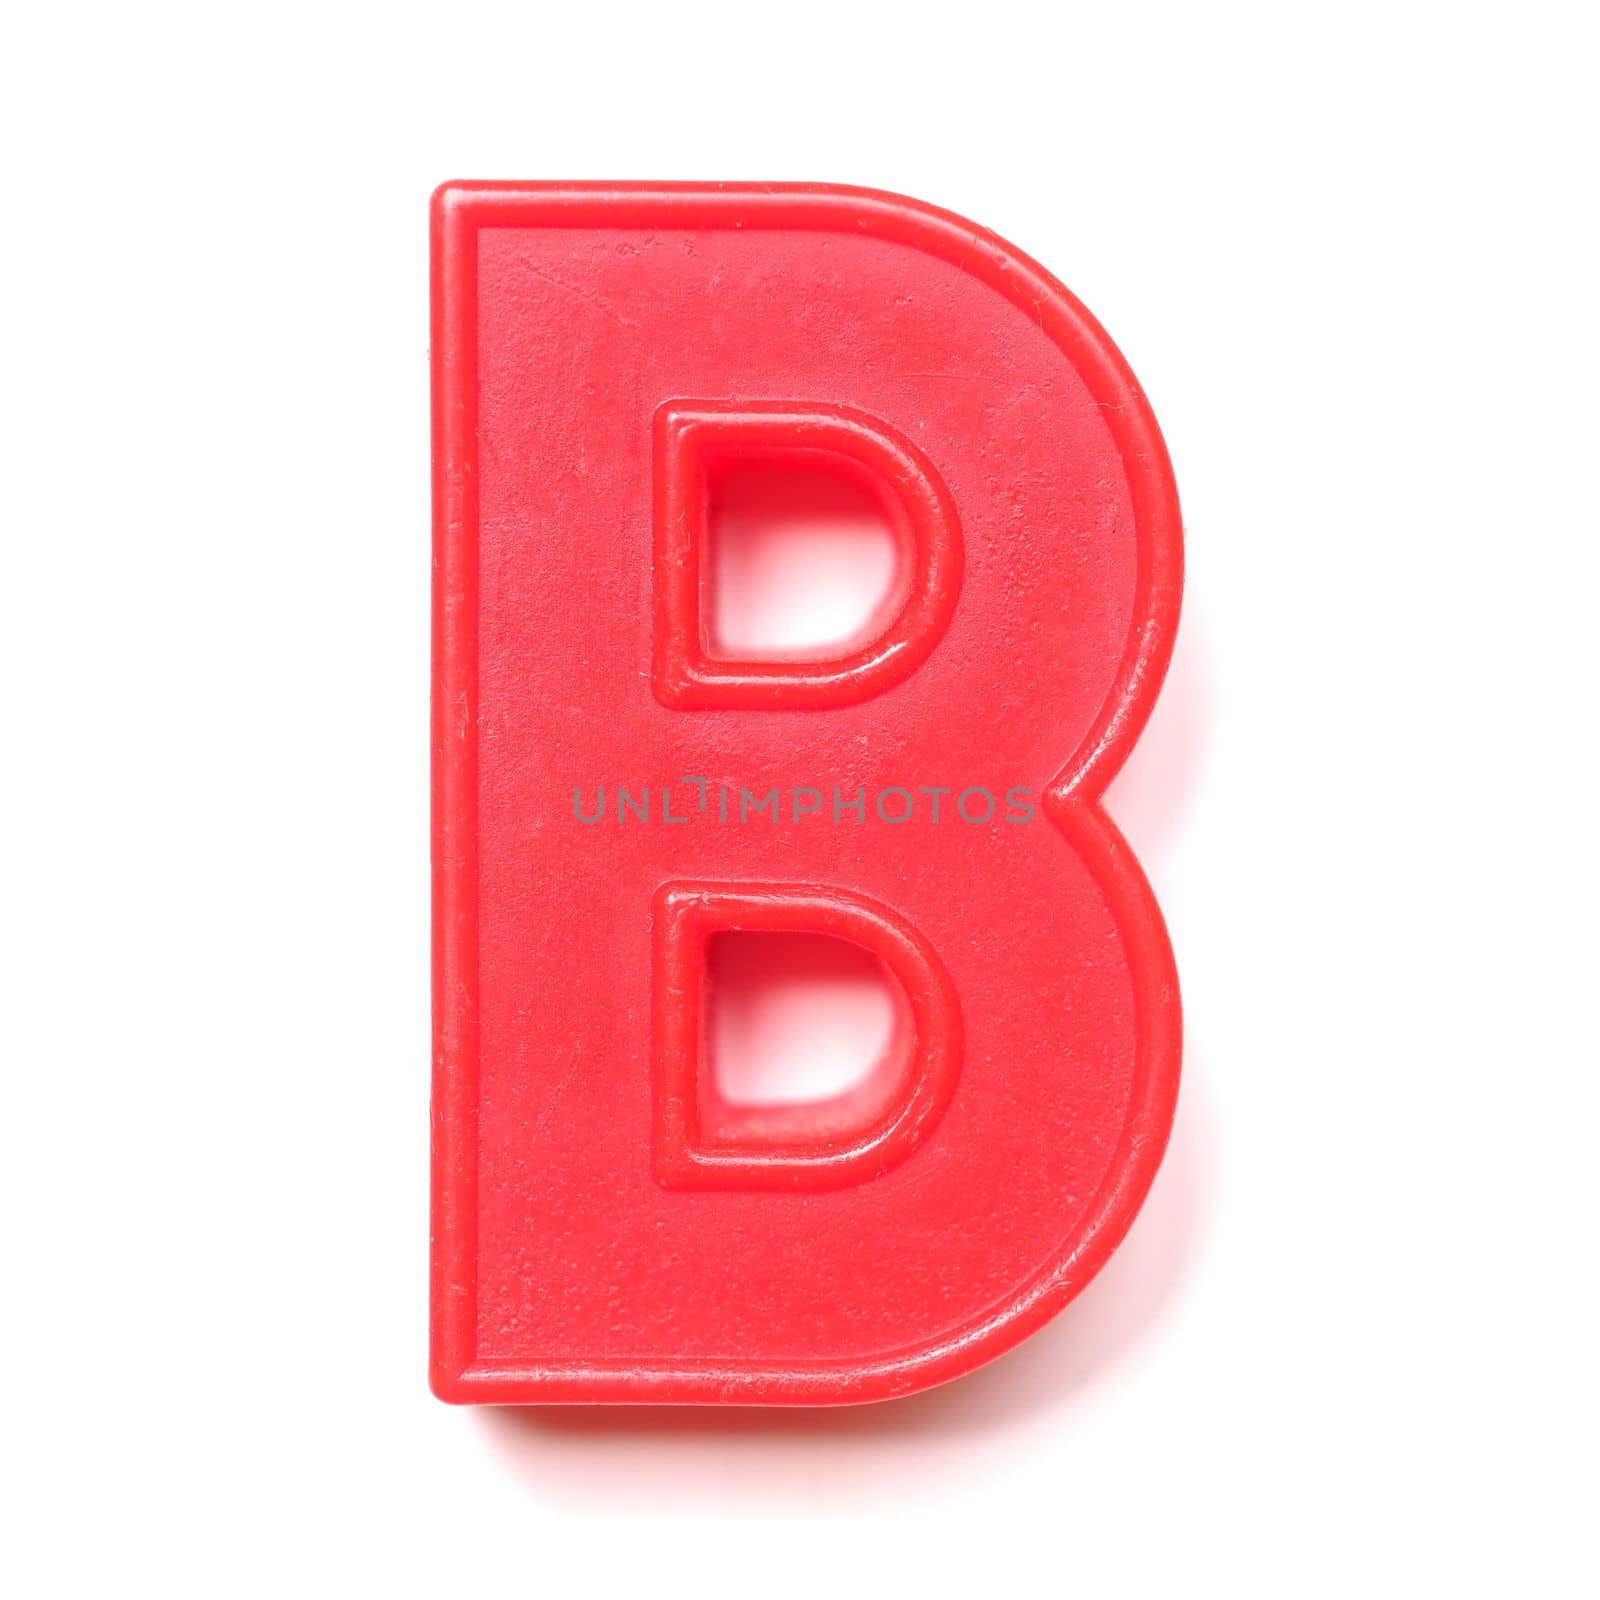 Magnetic uppercase letter B by claudiodivizia